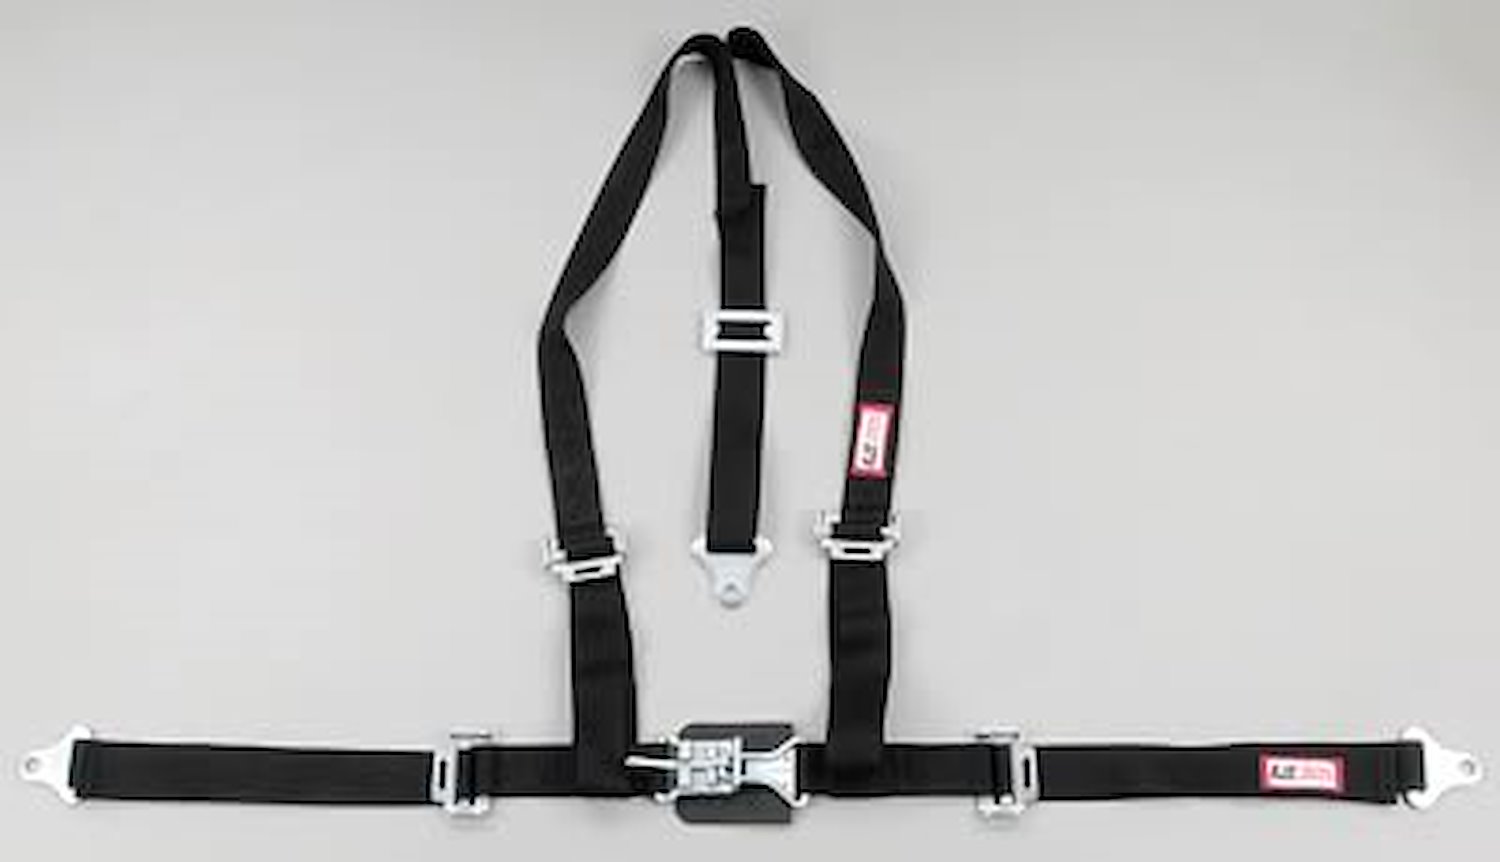 NON-SFI L&L HARNESS 2 PULL DOWN Lap Belt SEWN IN 2 S.H. V ROLL BAR Mount ALL WRAP ENDS GRAY